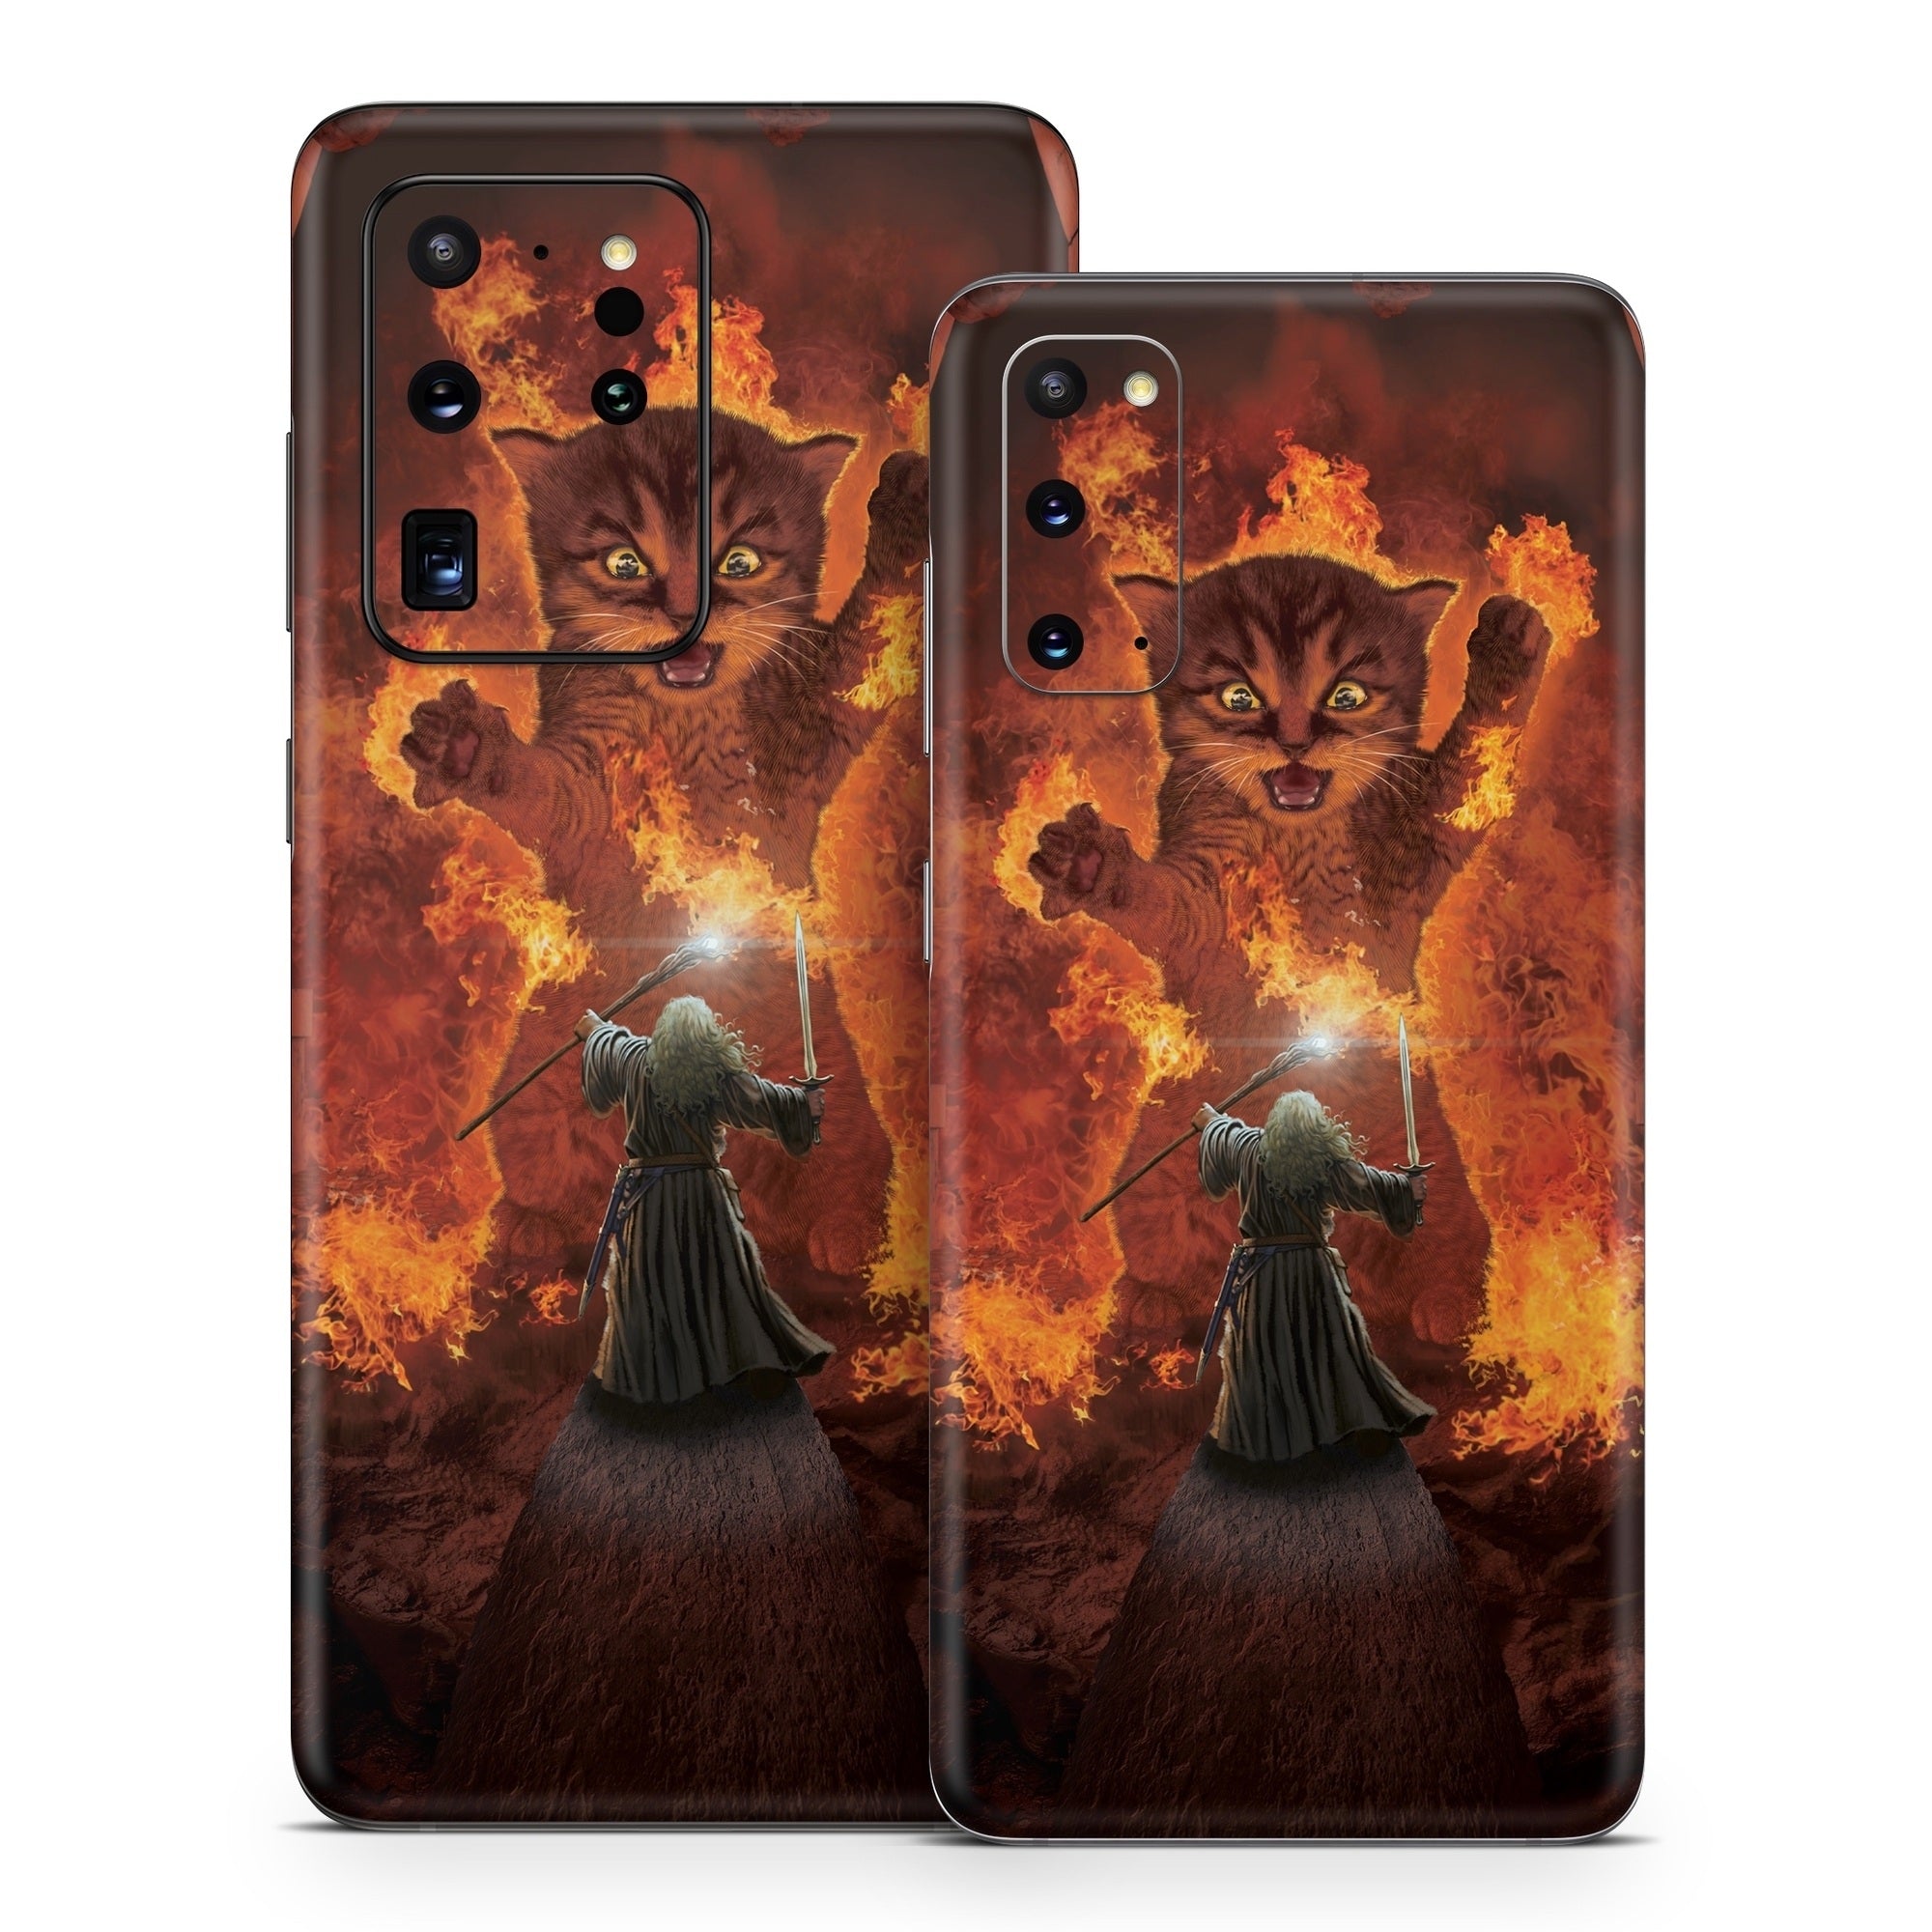 You Shall Not Pass - Samsung Galaxy S20 Skin